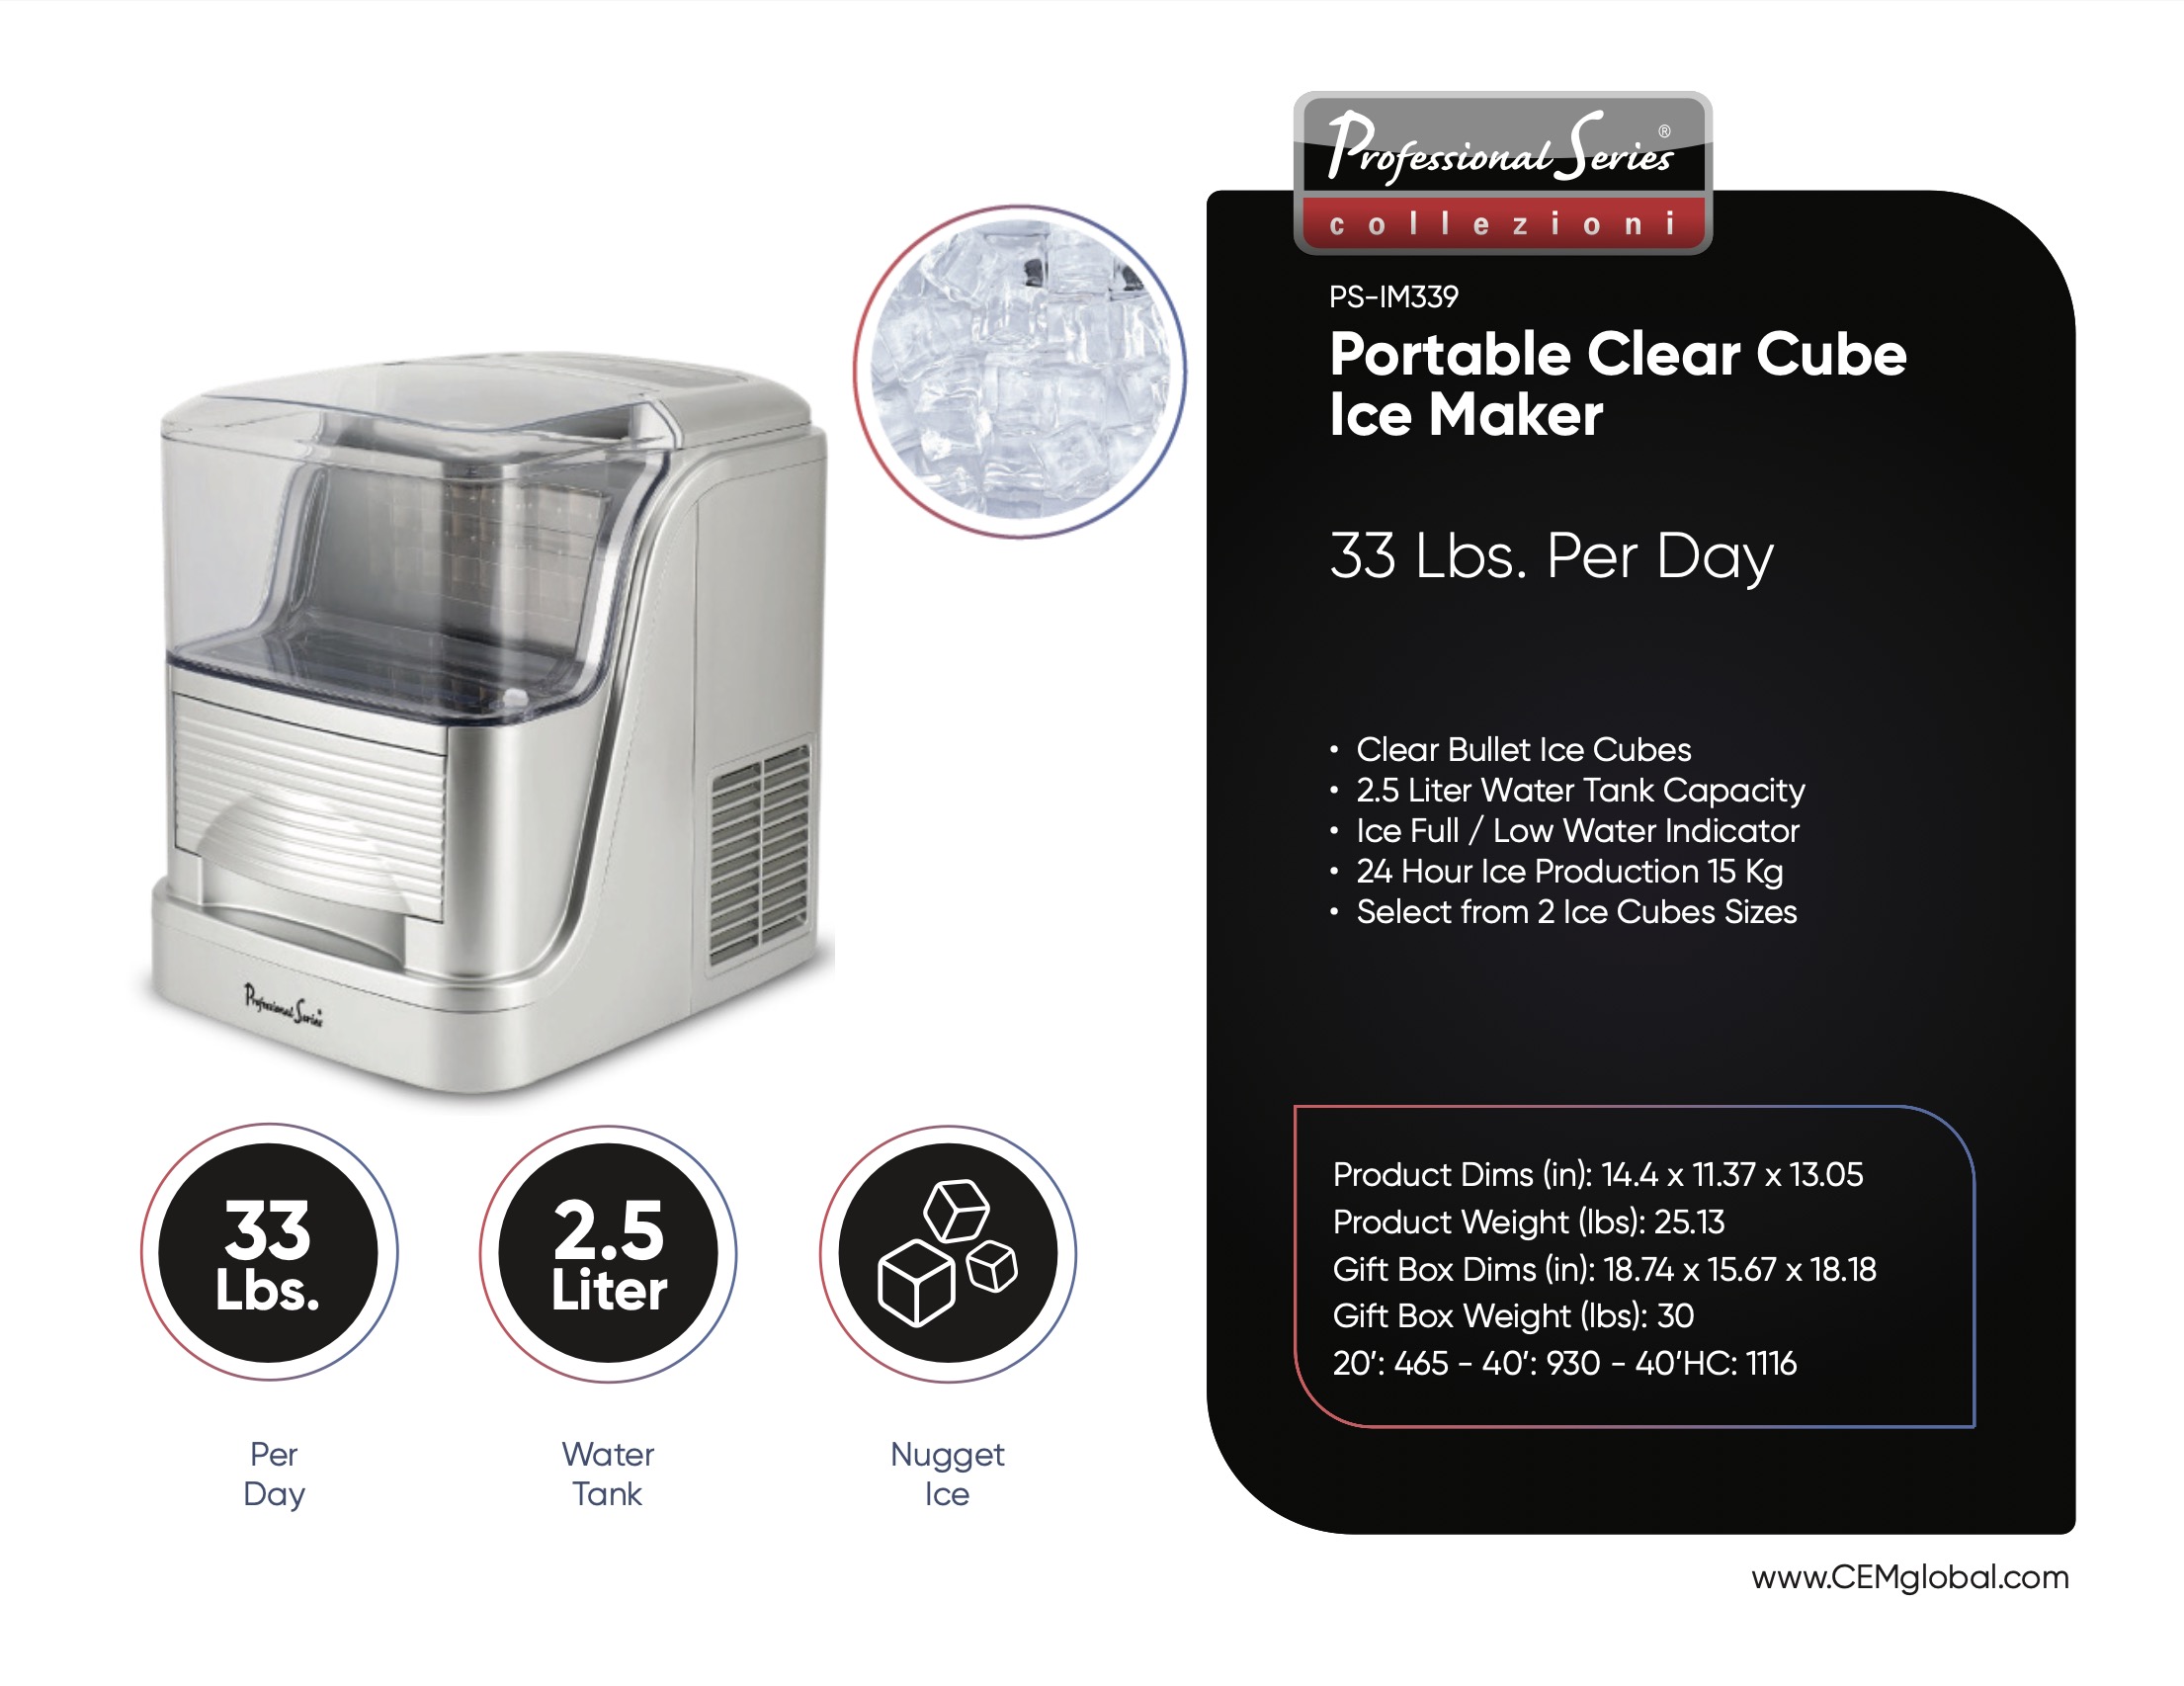 Portable Clear Cube Ice Maker 33 Lbs.